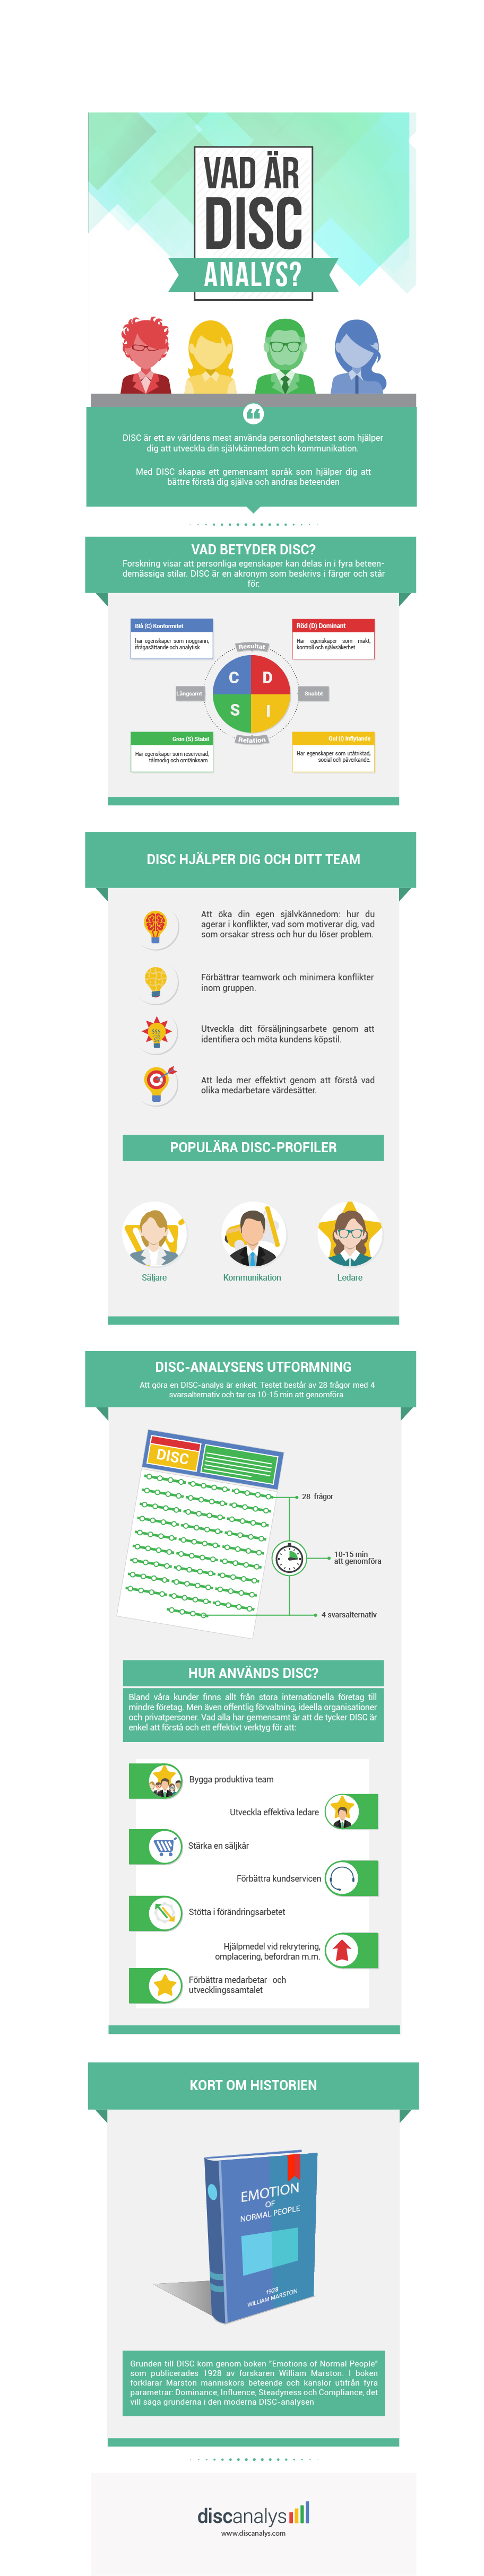 DISC analys test infographic